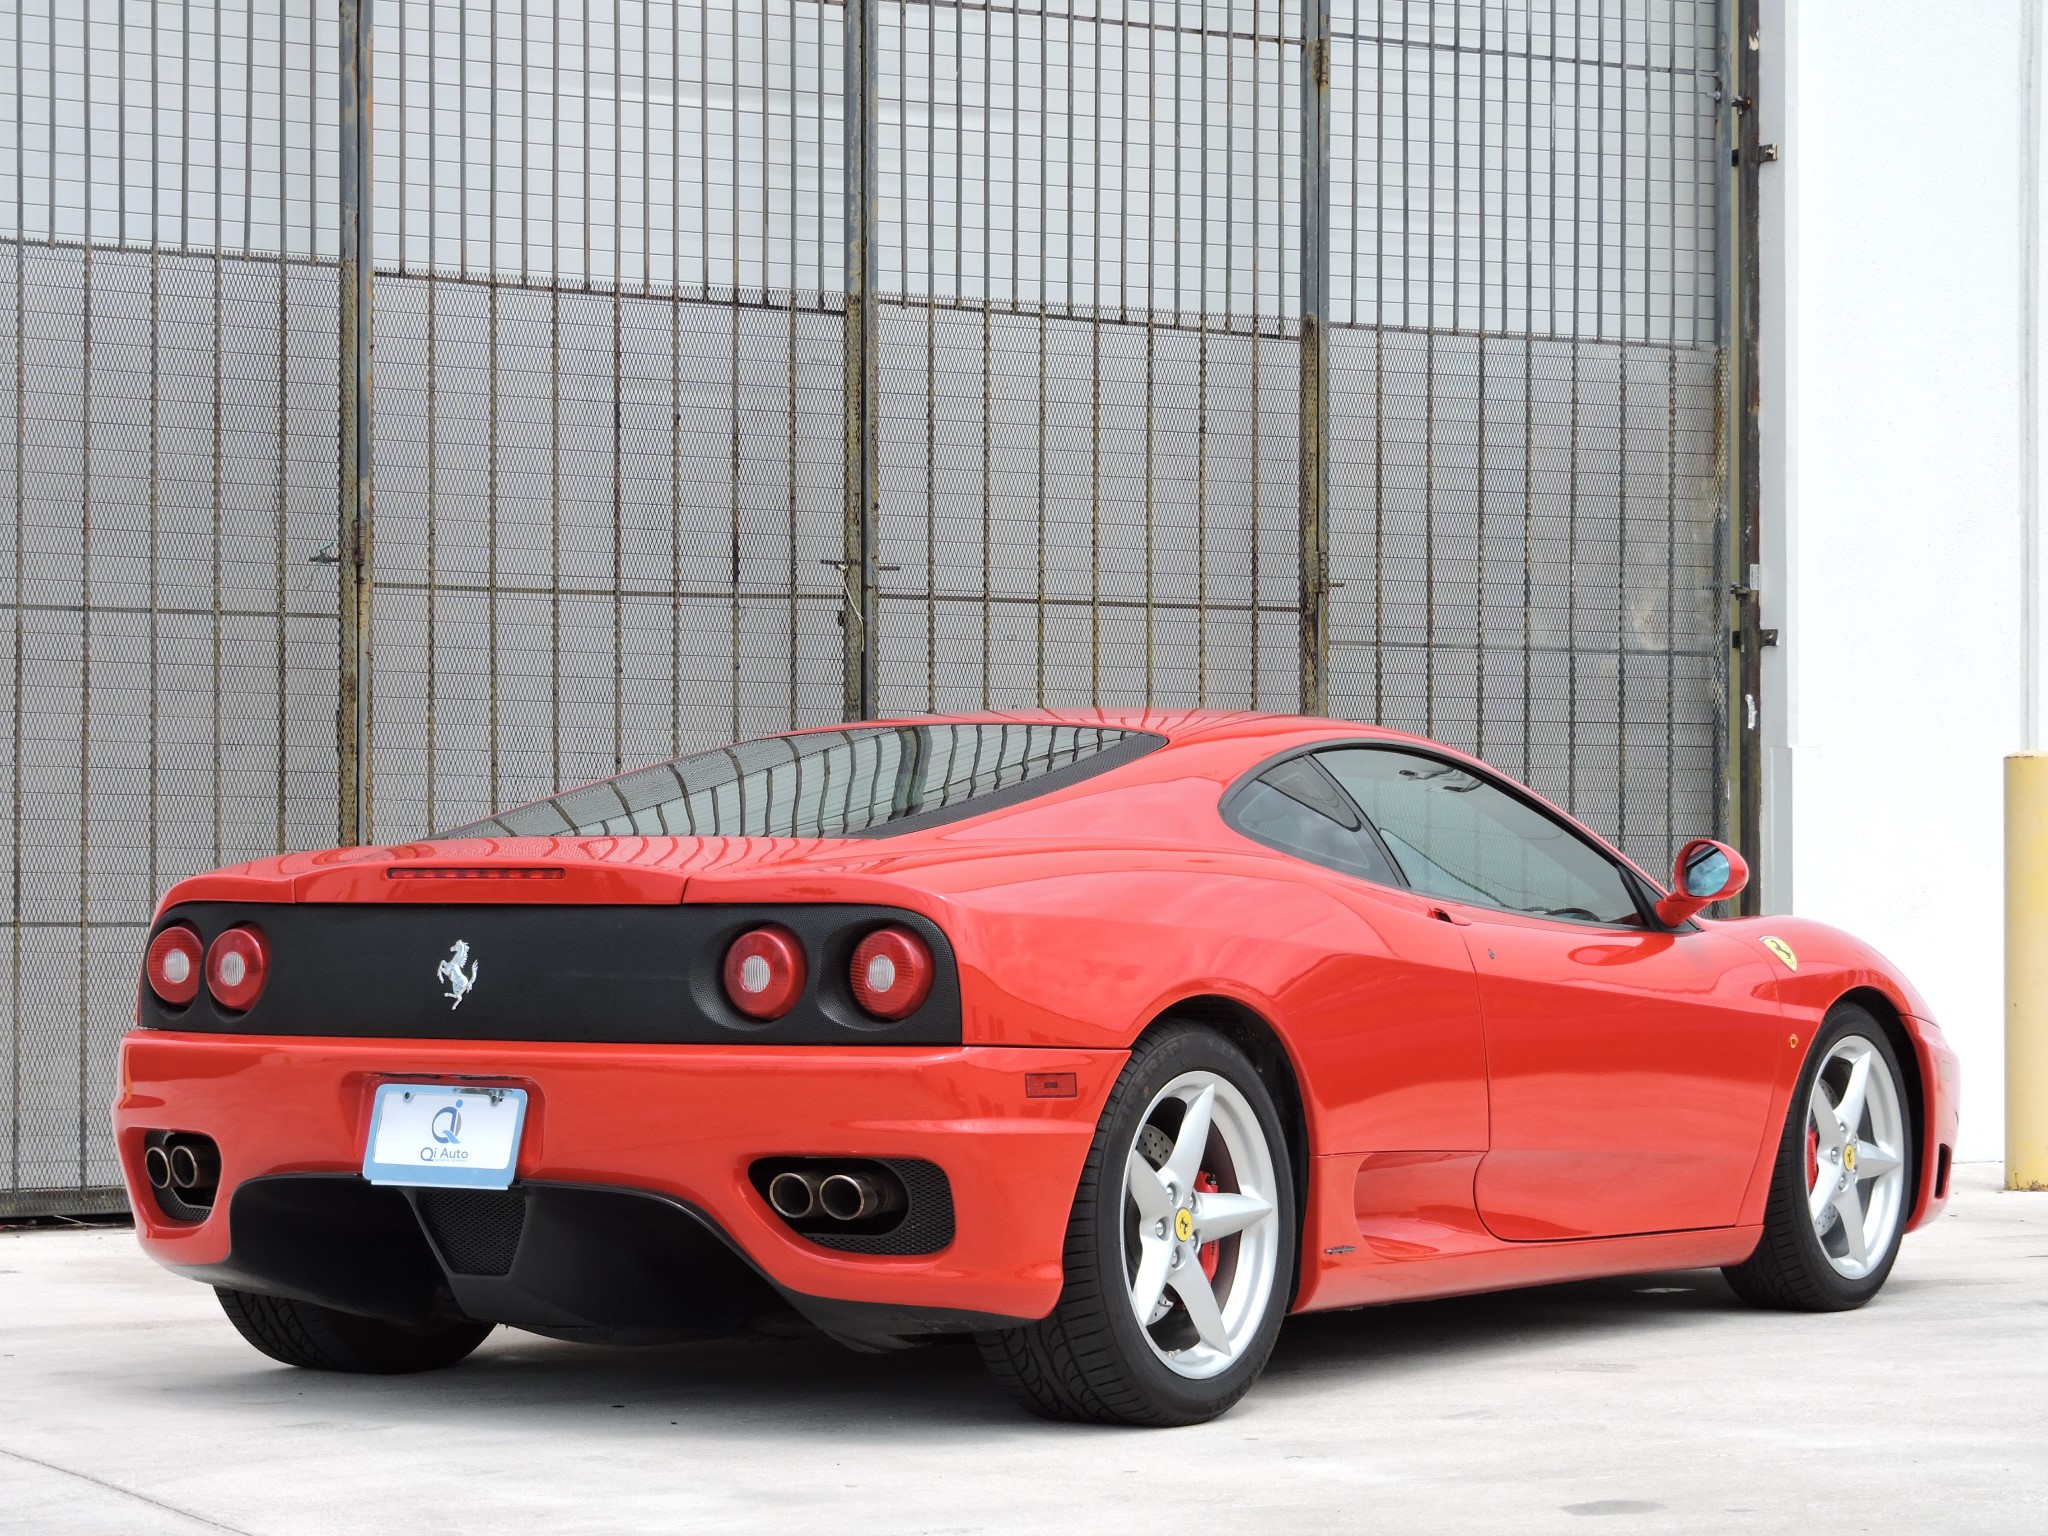 What really sets the Ferrari 360 apart is its aluminium space frame chassis.